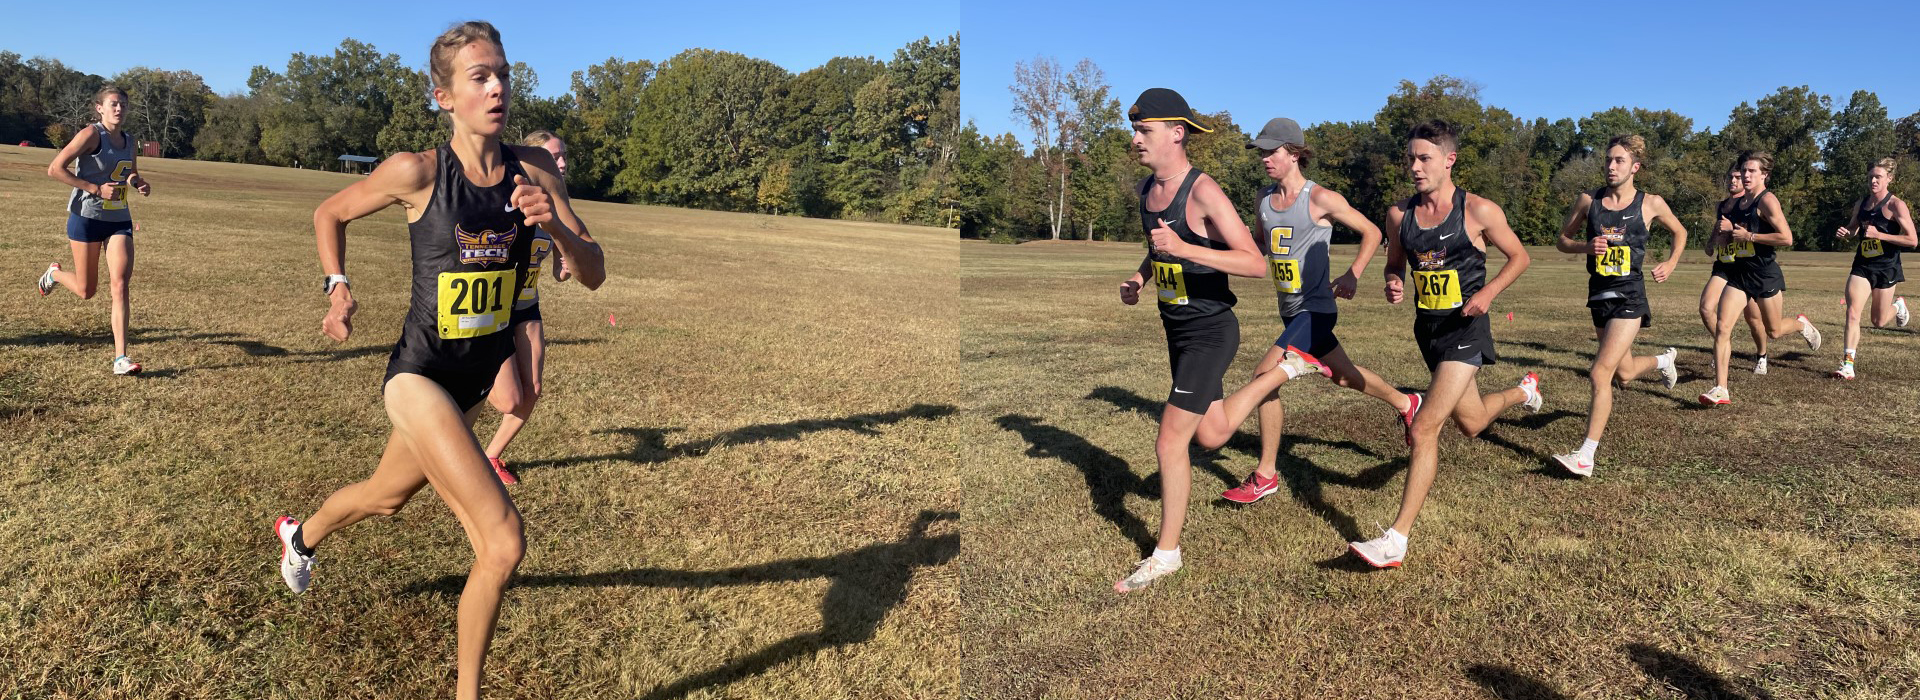 Tech cross country teams lock down wins at Chattanooga Invitational